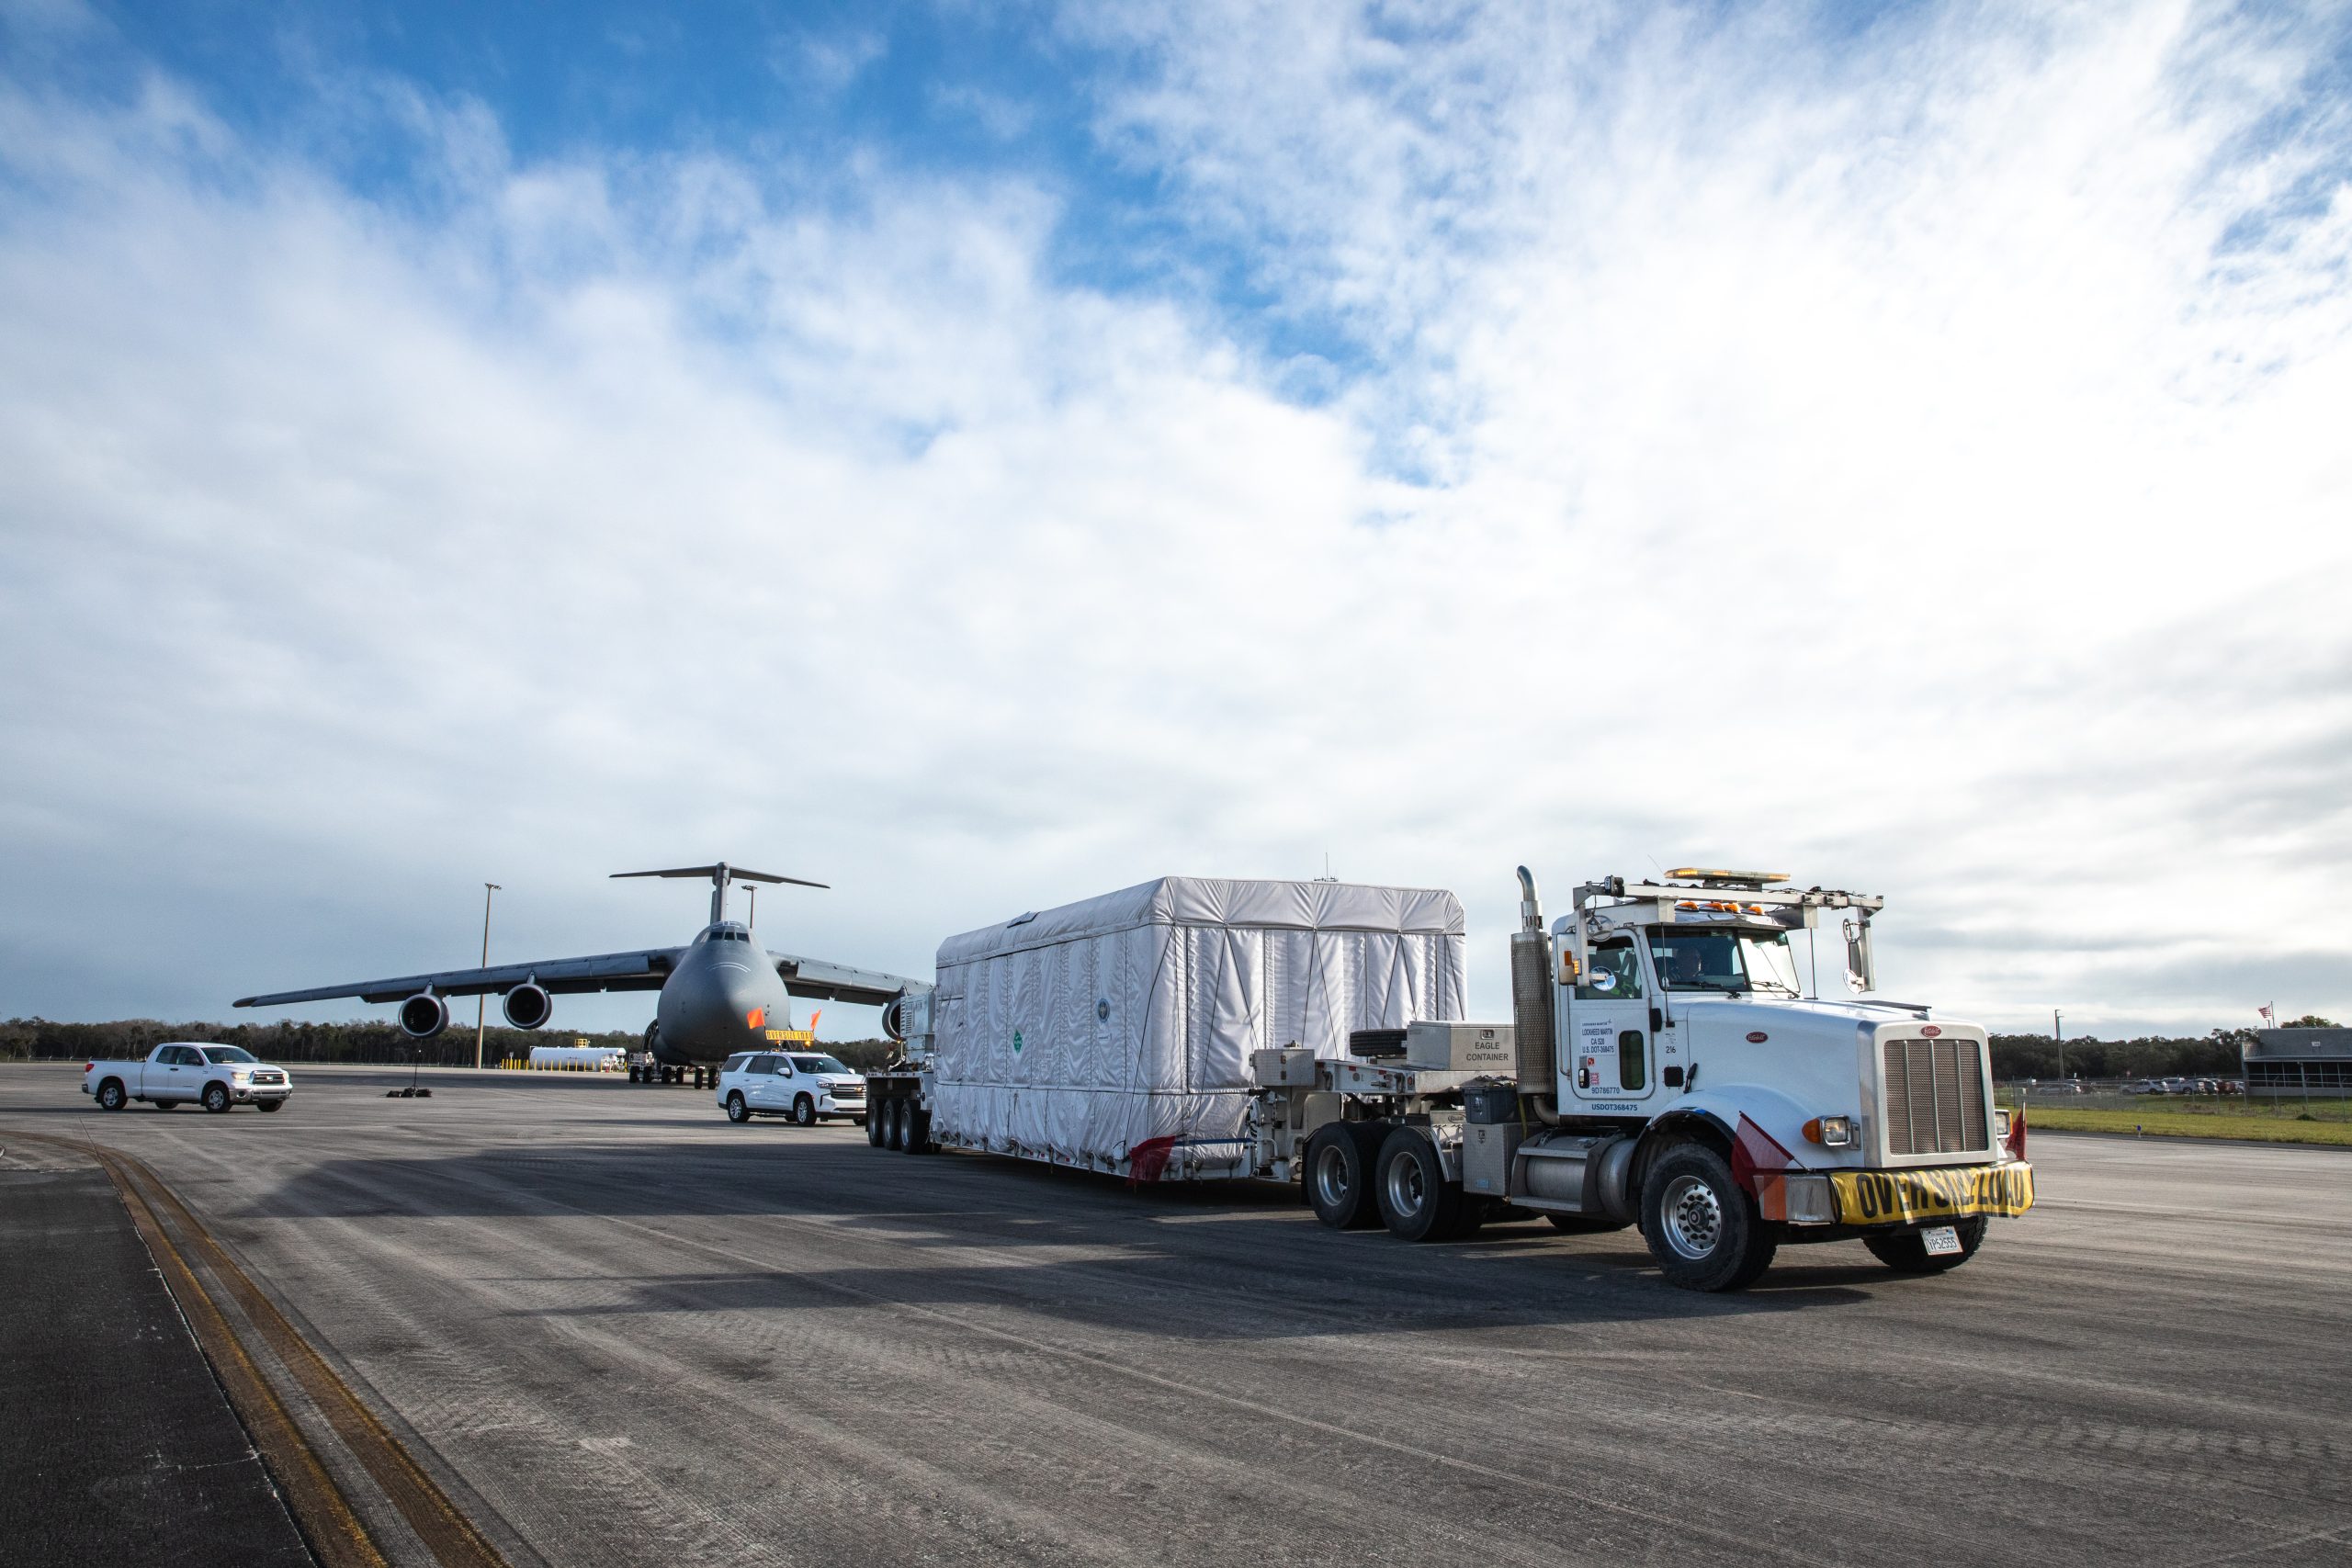 NOAA’s GOES-U Arrives in Florida for Processing Ahead of Launch